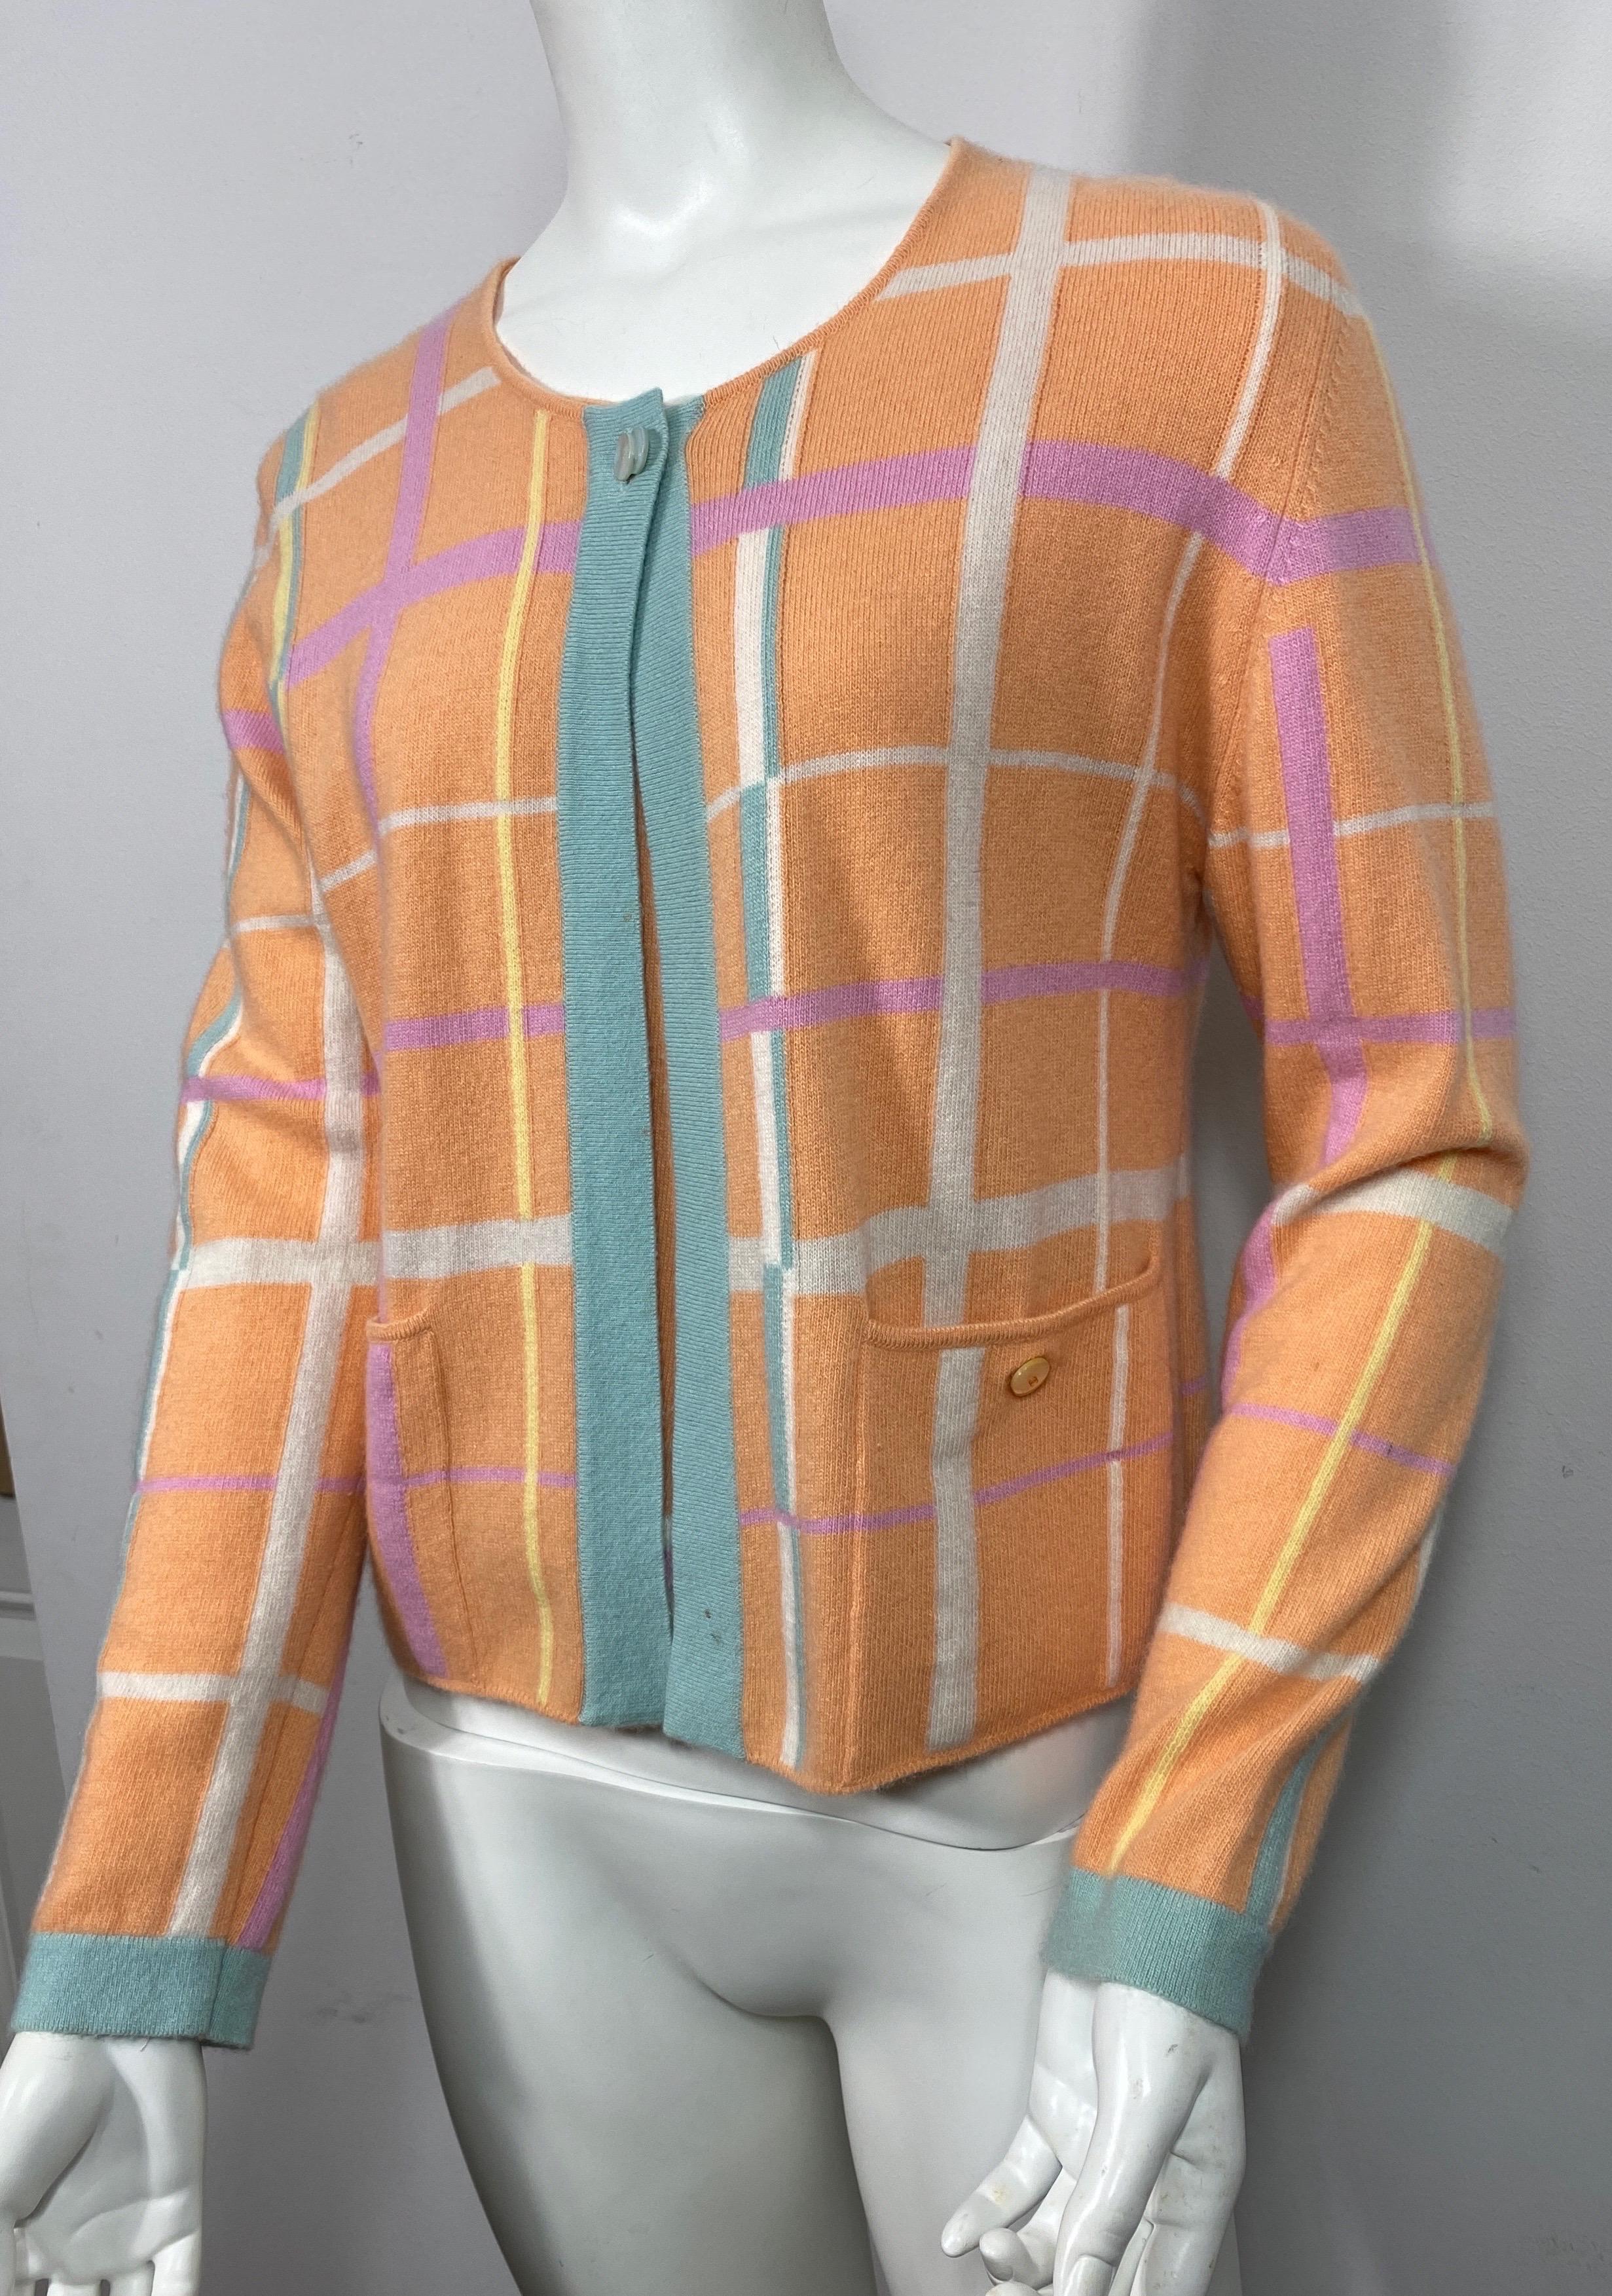 Women's or Men's Chanel 1999 Cruise Collection Melon and Pastel Cashmere Sweater Set-Size 42